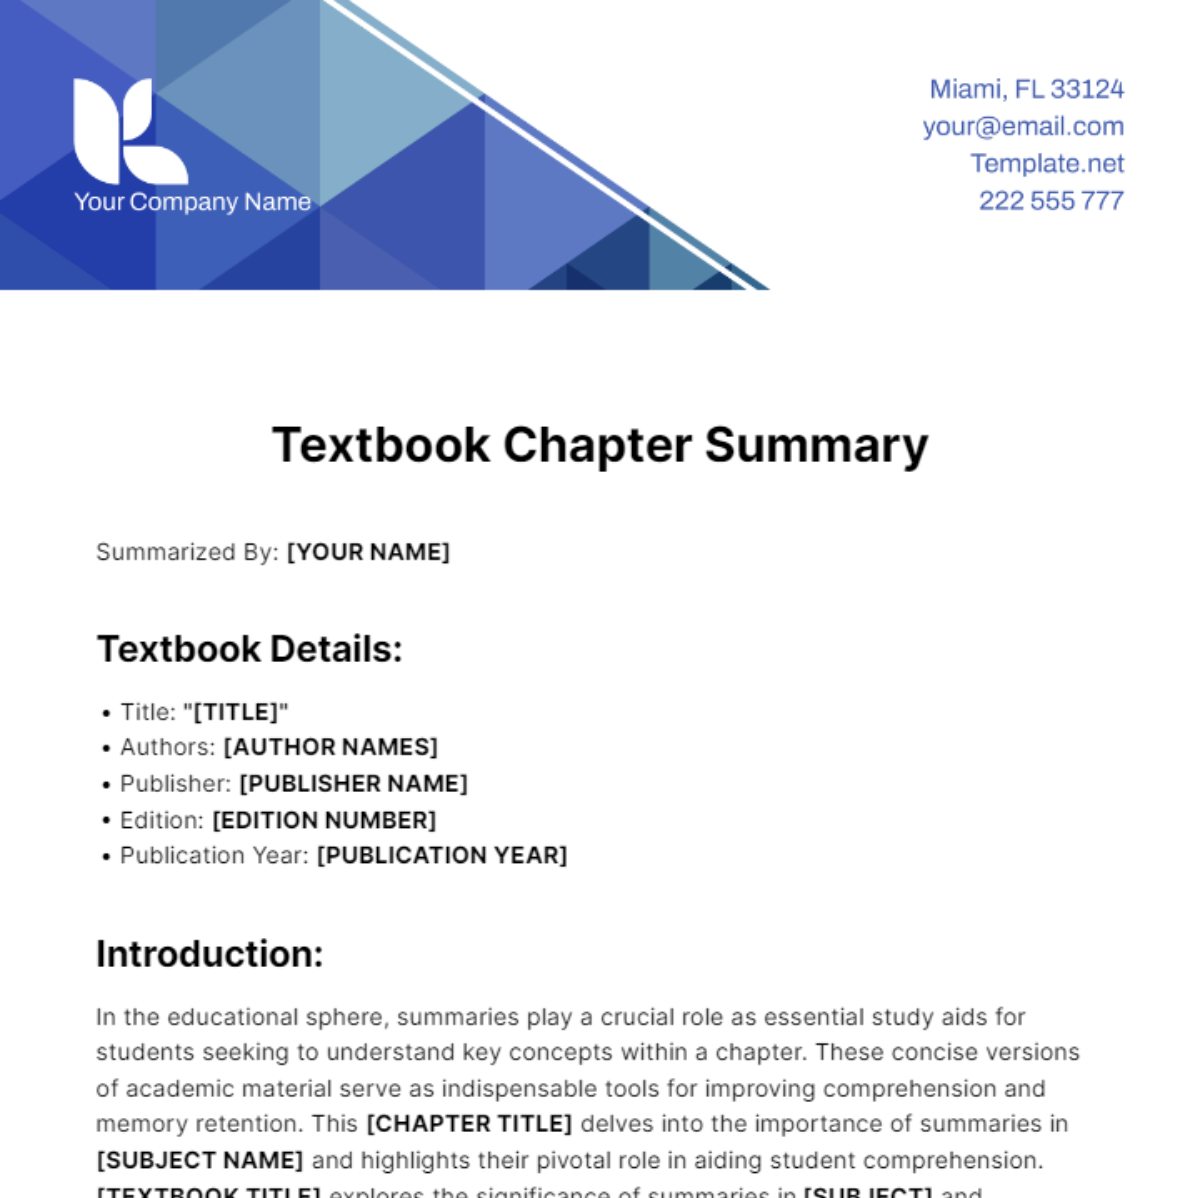 Textbook Chapter Summary Template